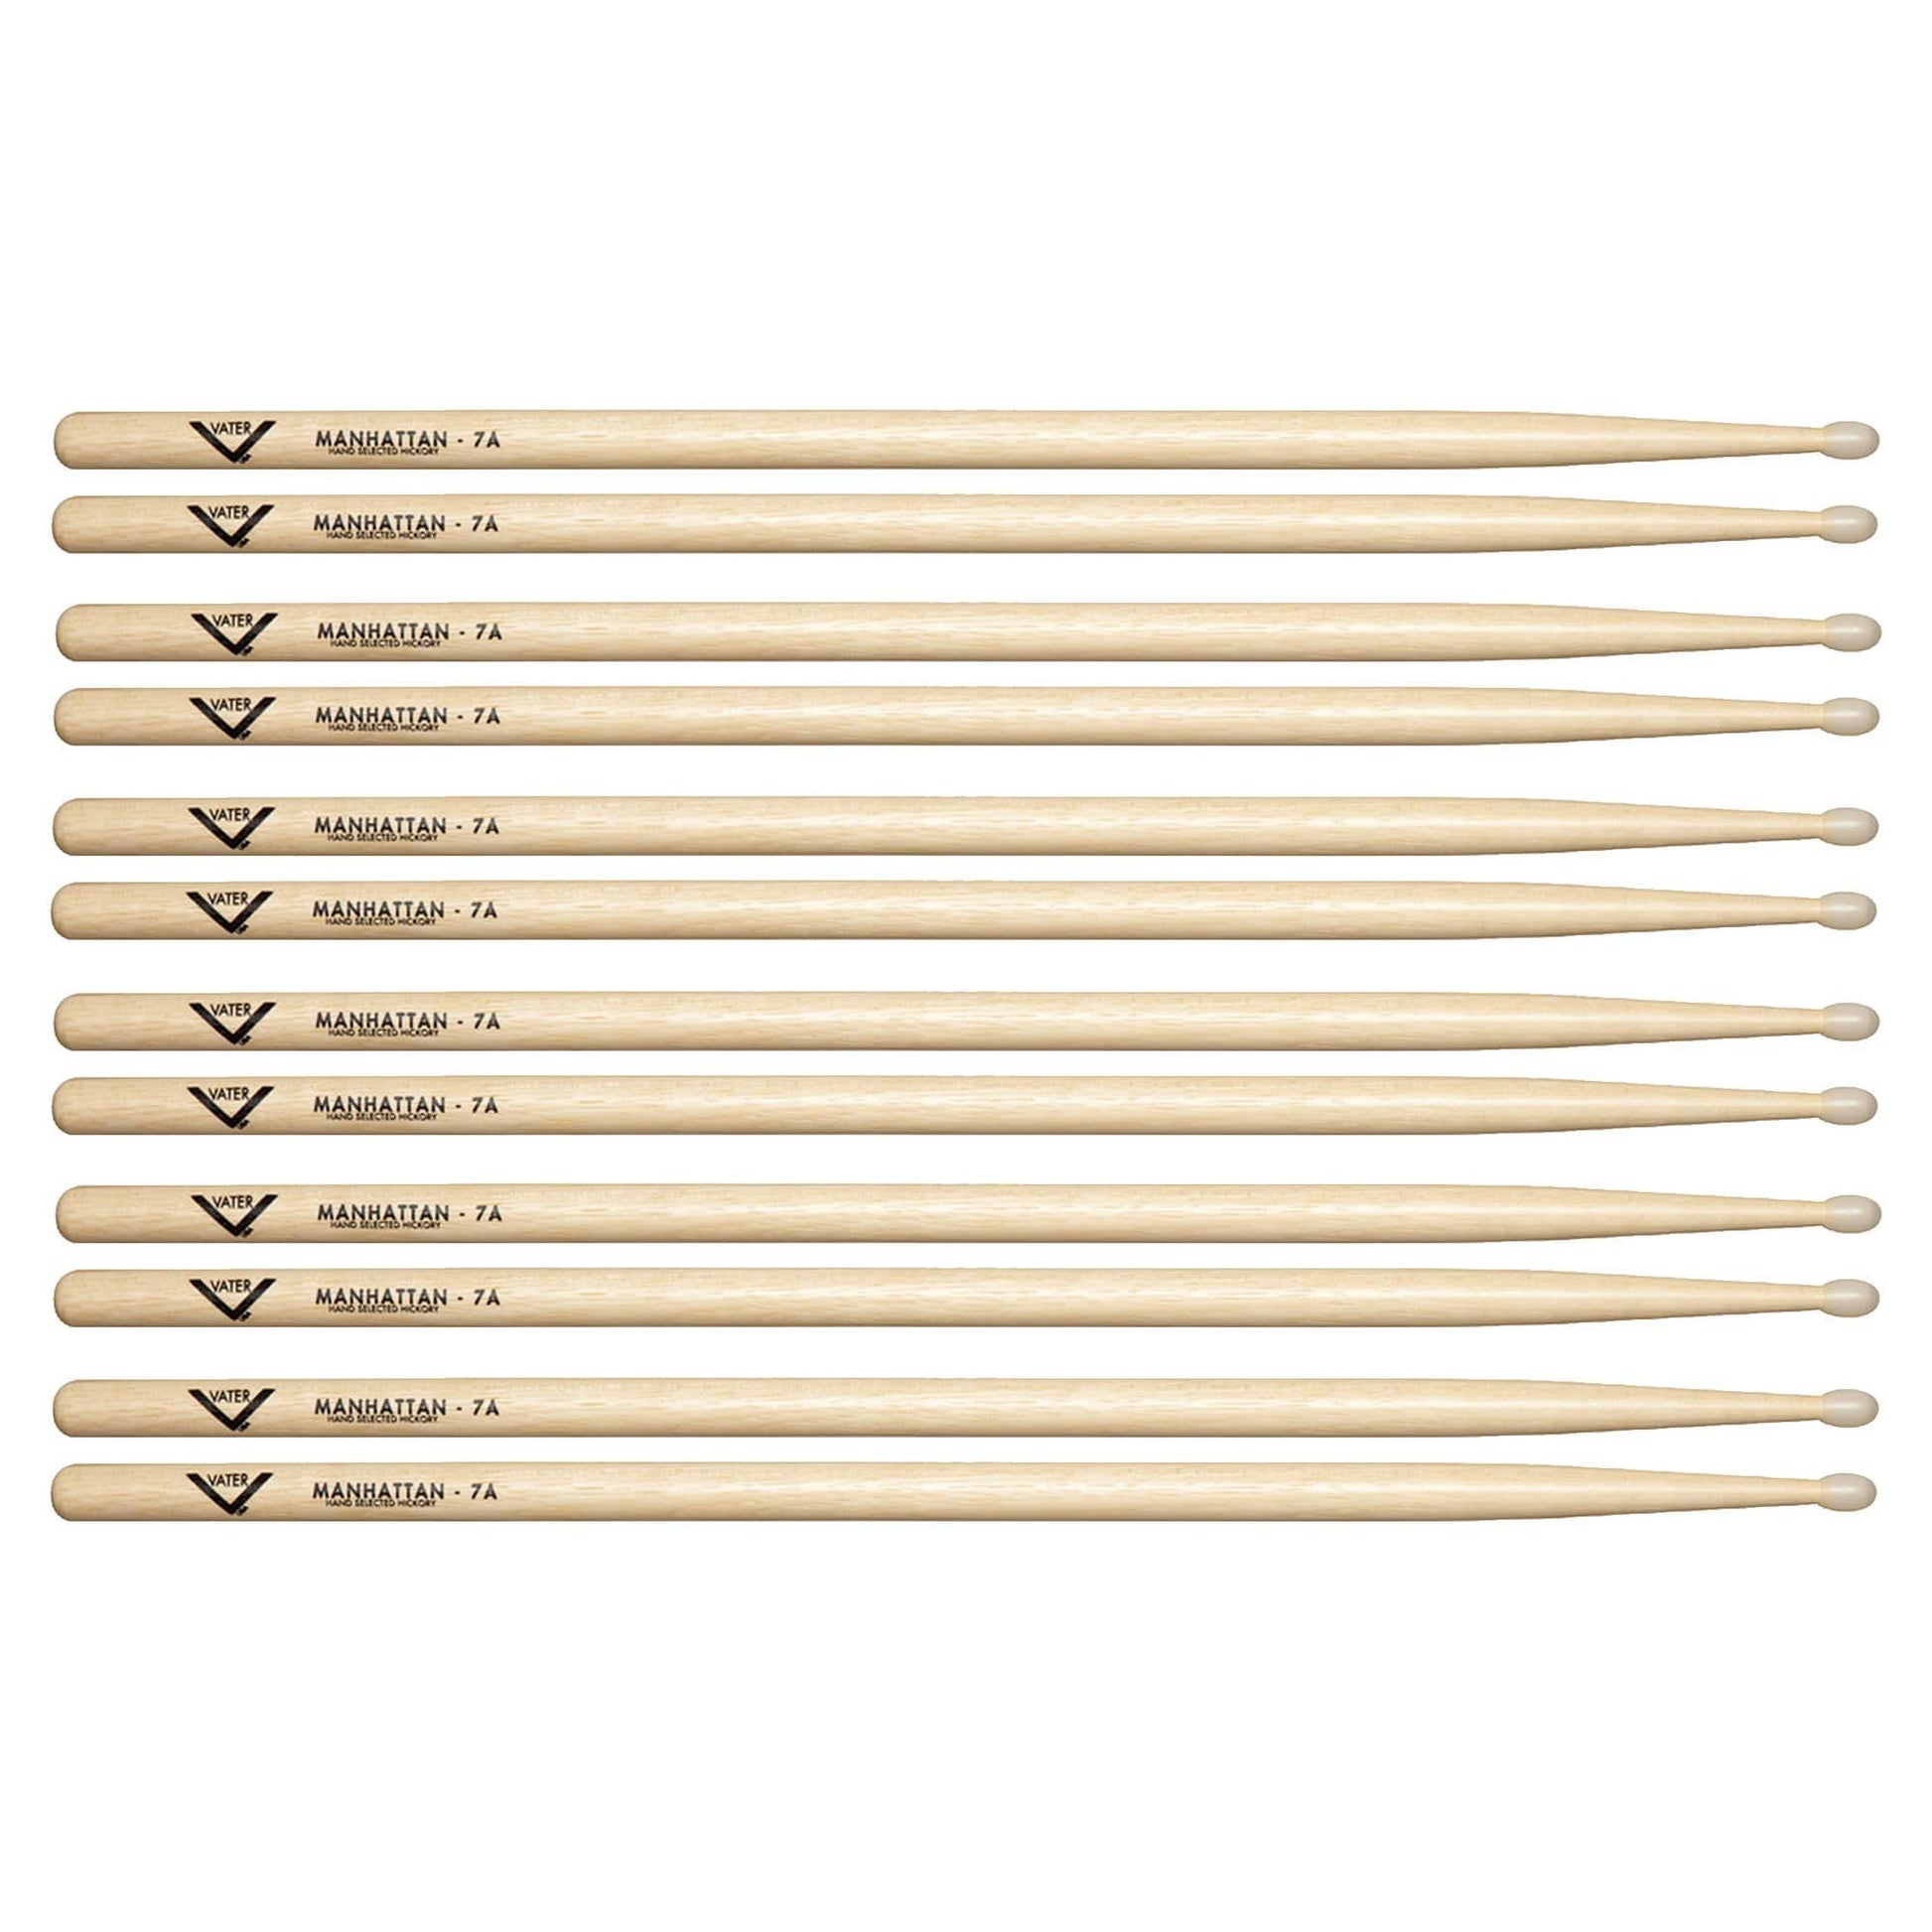 Vater Hickory Manhattan 7A Nylon Tip Drum Sticks (6 Pair Bundle) Drums and Percussion / Parts and Accessories / Drum Sticks and Mallets